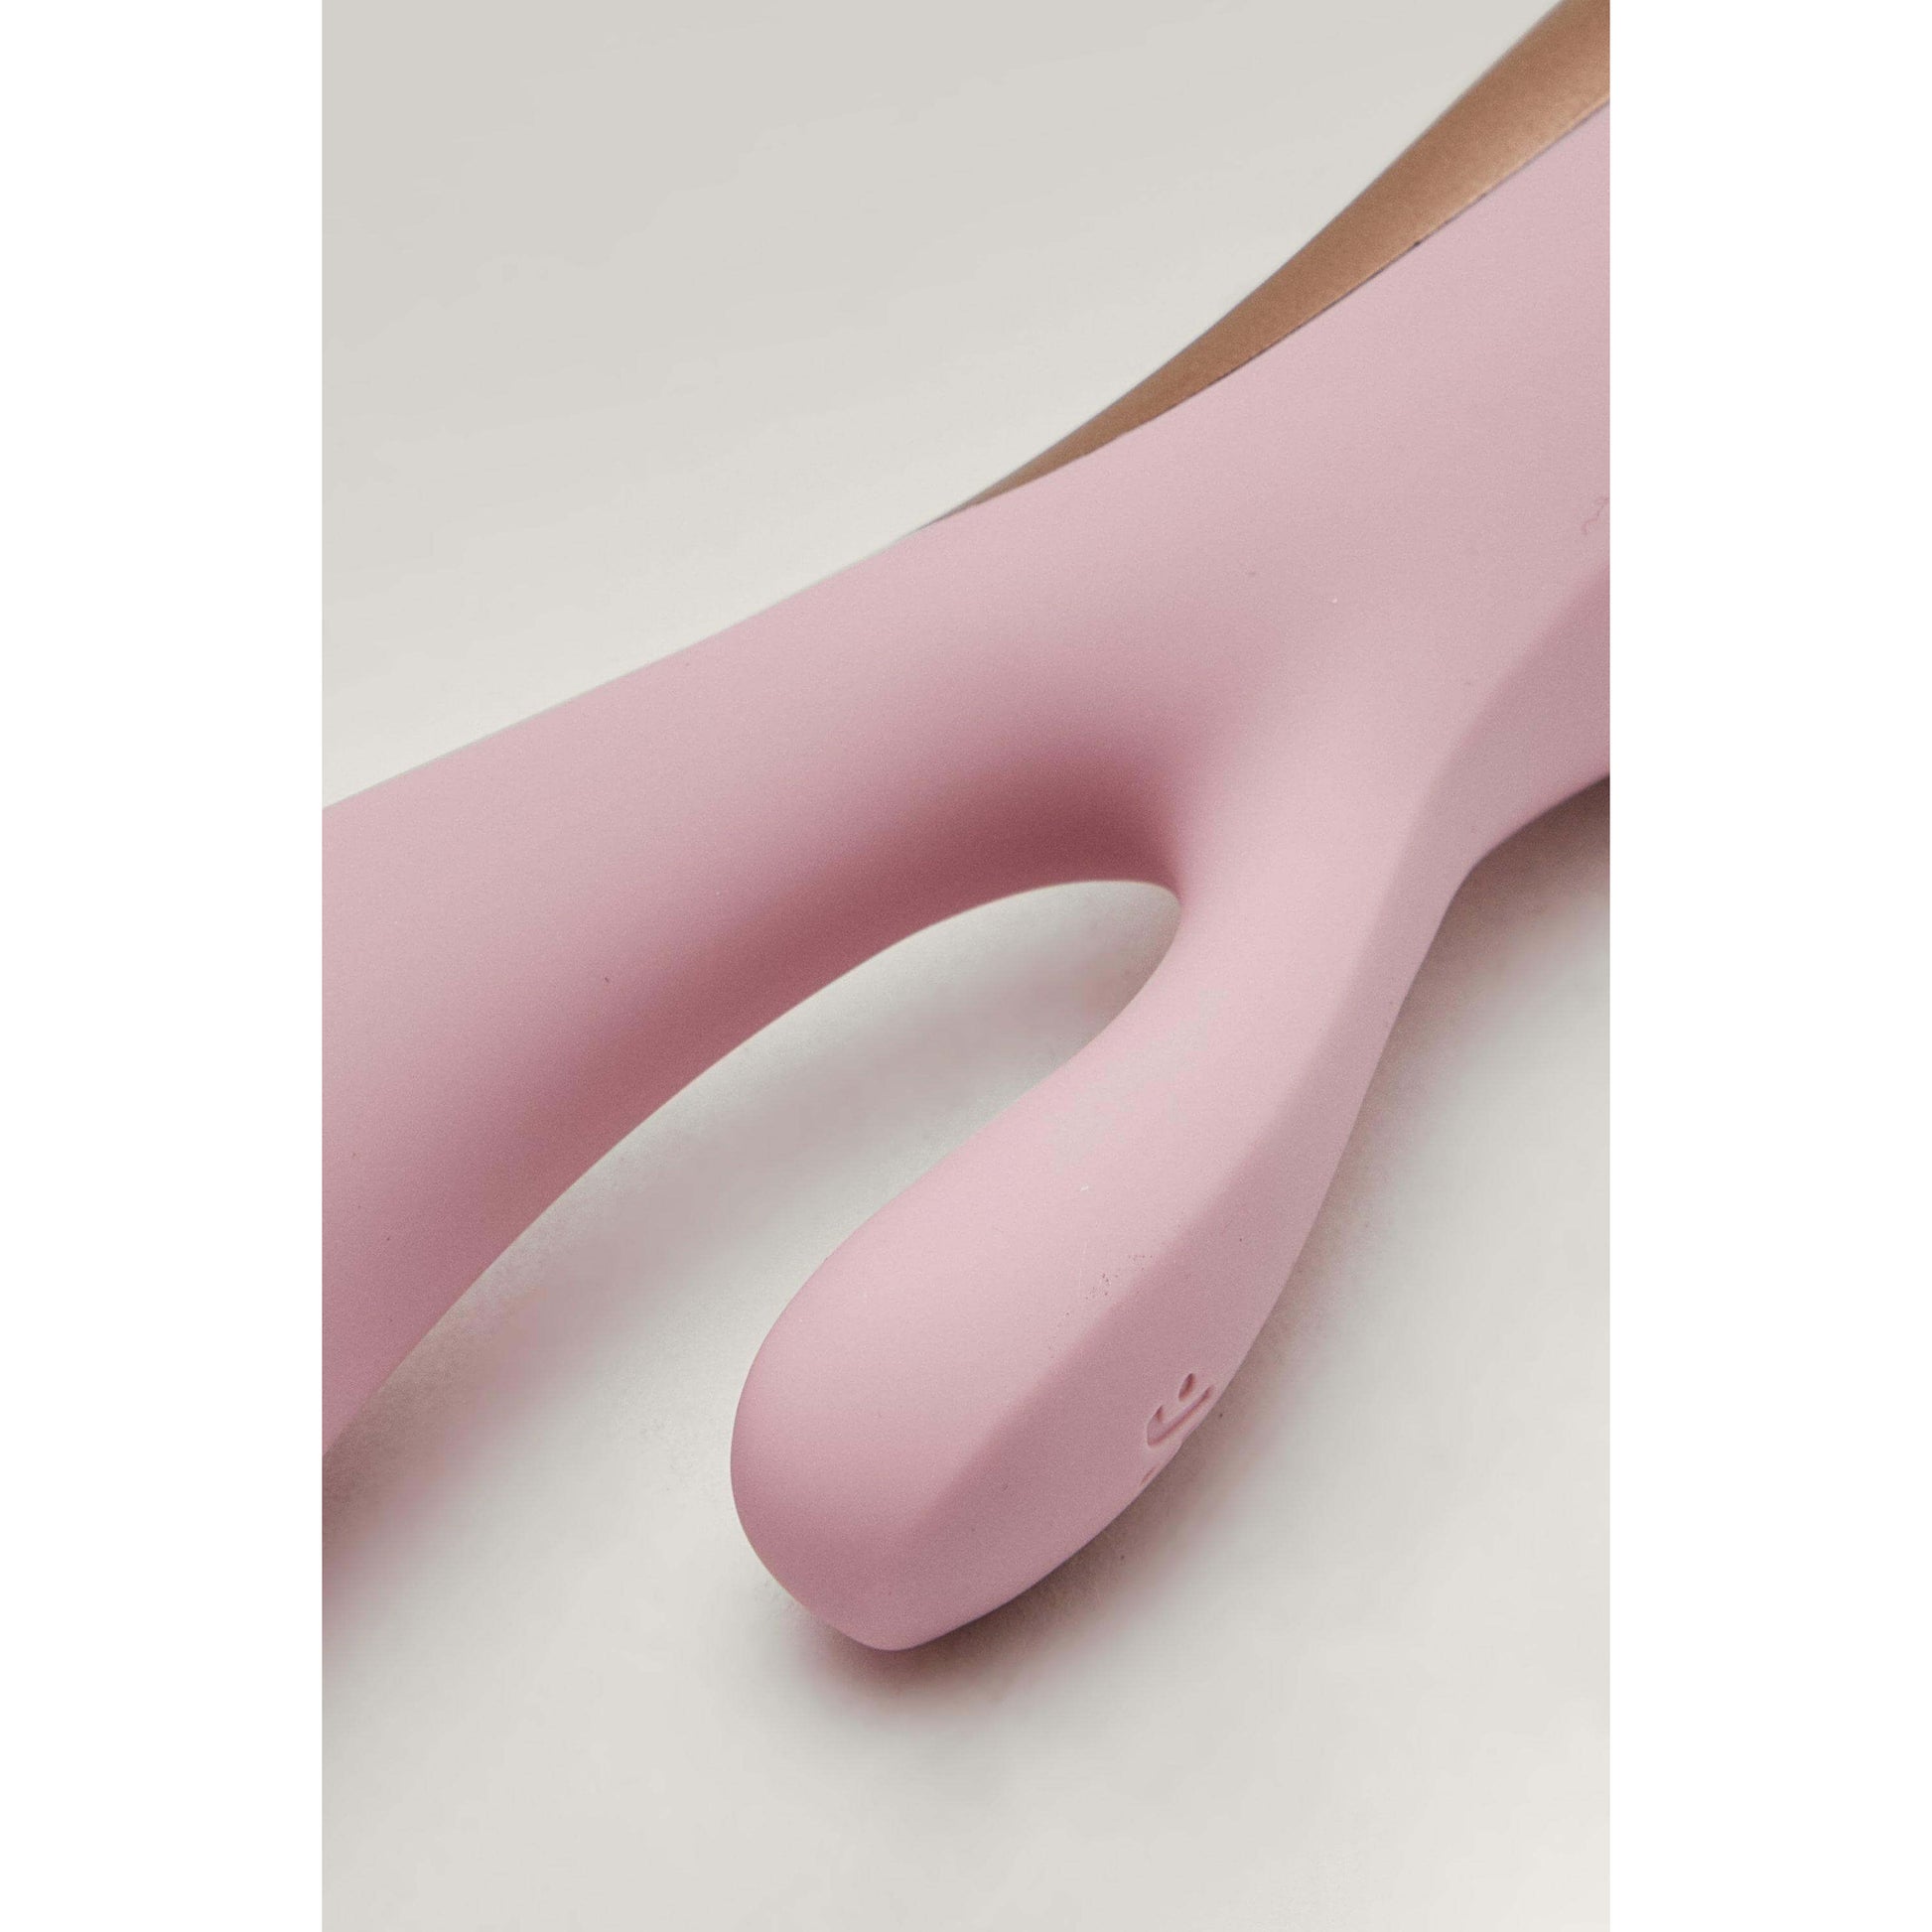 Satisfyer Mono Flex Rabbit Vibrator - by The Bigger O - an online sex toy shop. We ship to USA, Canada and the UK.